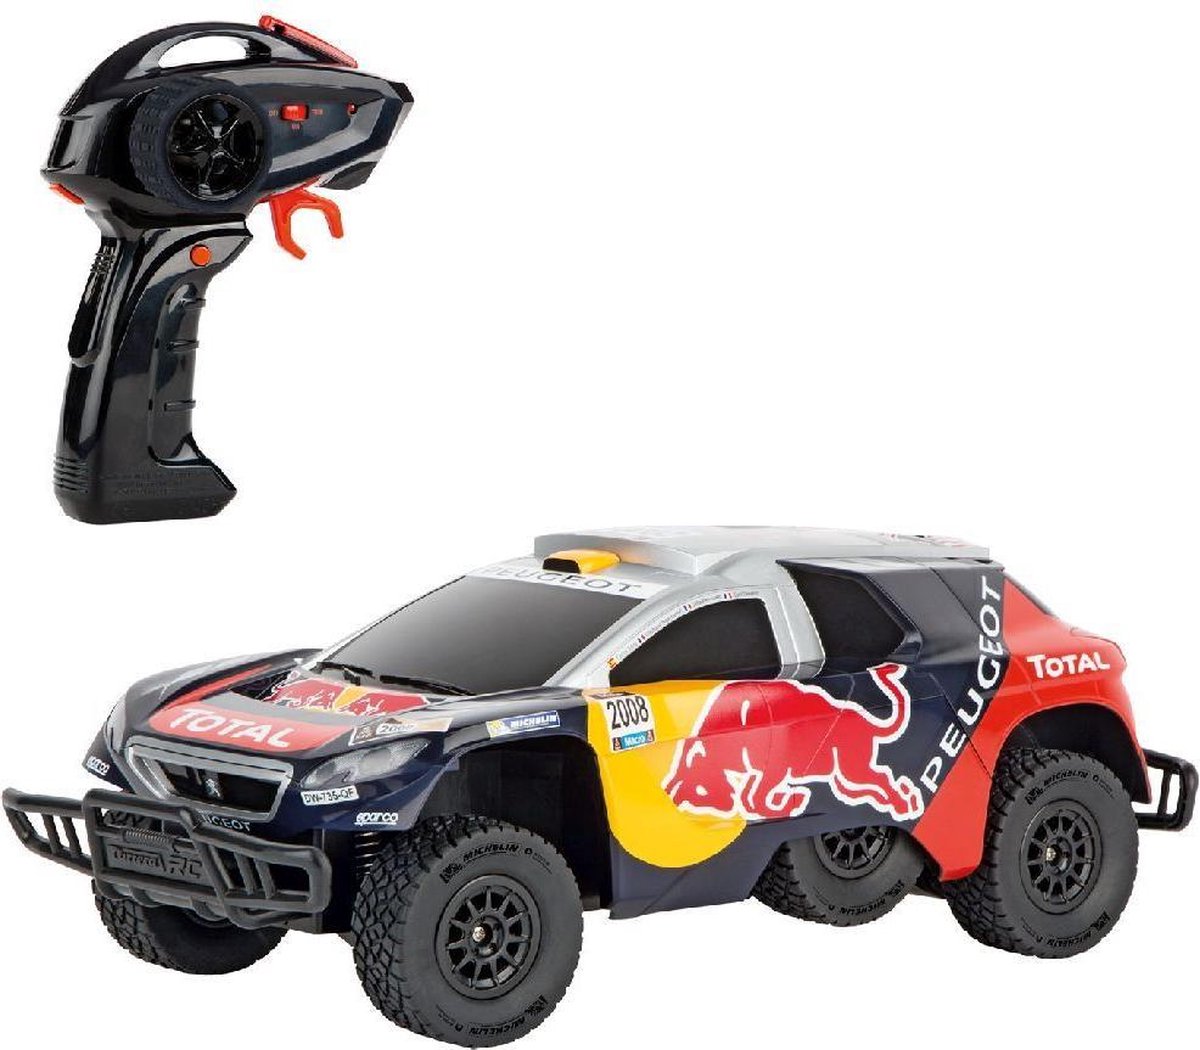 Carrera auto RC Peugeot 08 Red Bull 2,4 GHz 1:16 5 delig - Negro